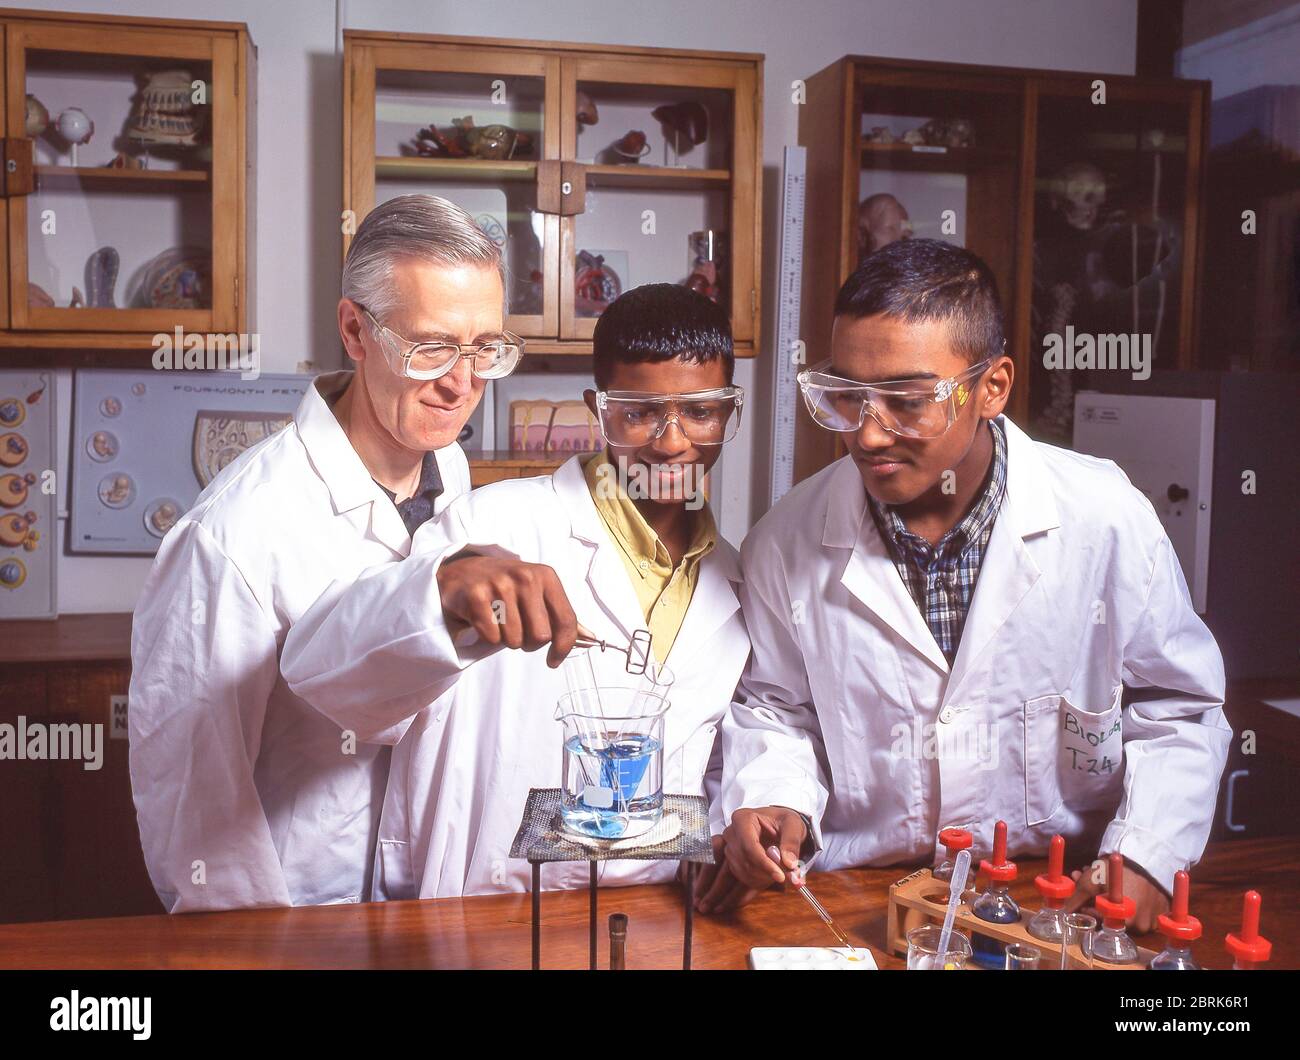 Asian students doing chemical experiments in science class, Surrey, England, United Kingdom Stock Photo